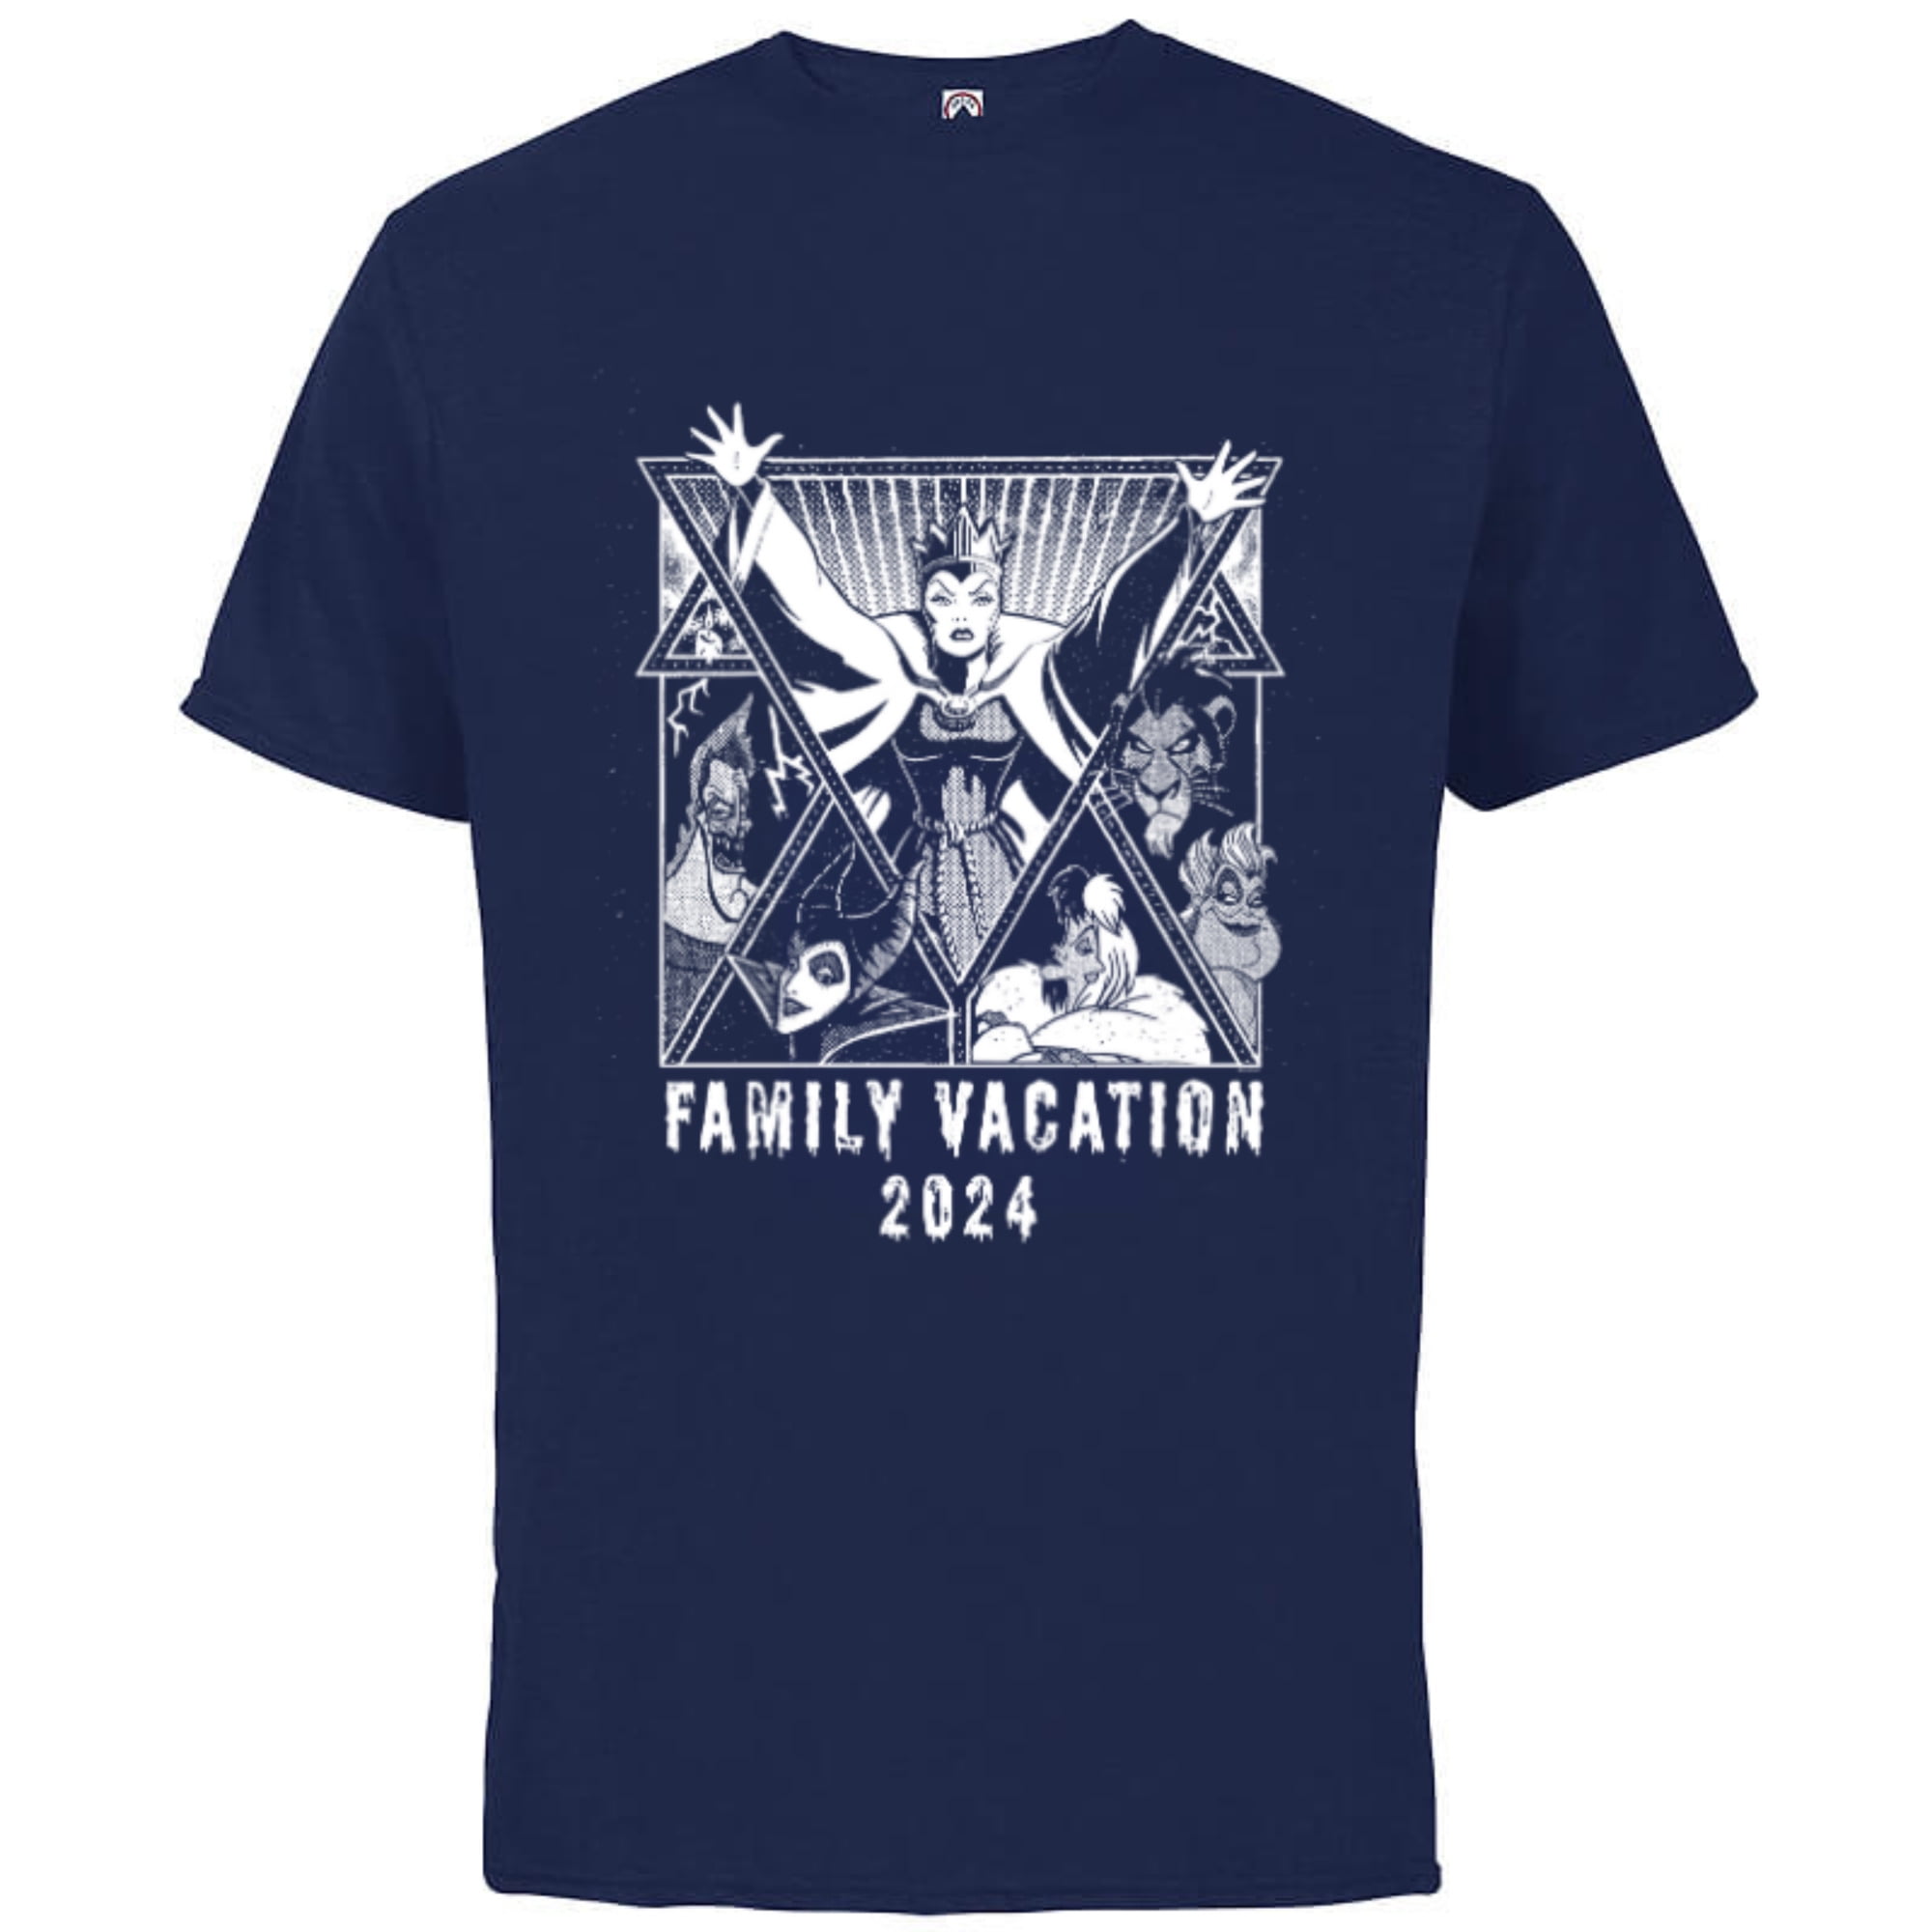 Disney Villains Graphic Print Family Vacation Trip 2024 - Short Sleeve  Cotton T-Shirt for Adults - Customized-Athletic Navy